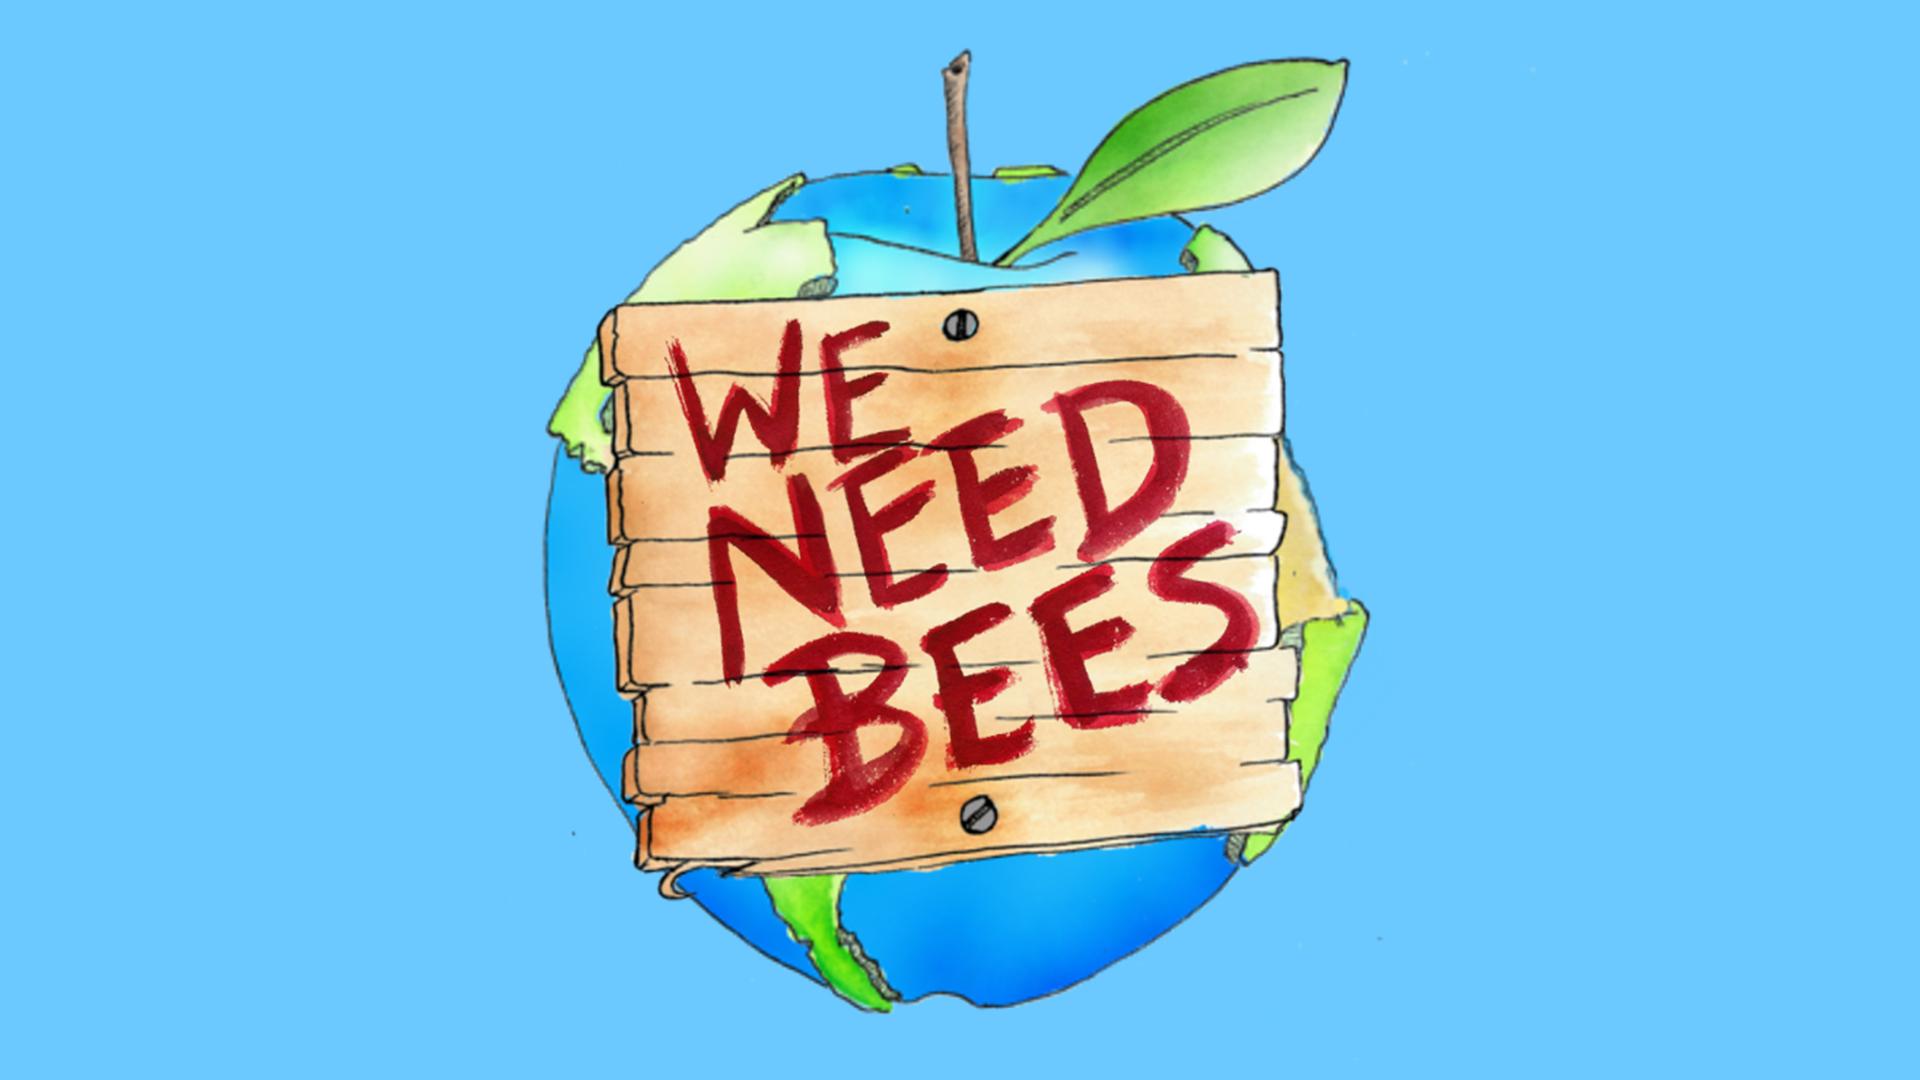 Illustration of an apple with "We Need Bees" painted on a wooden sign 